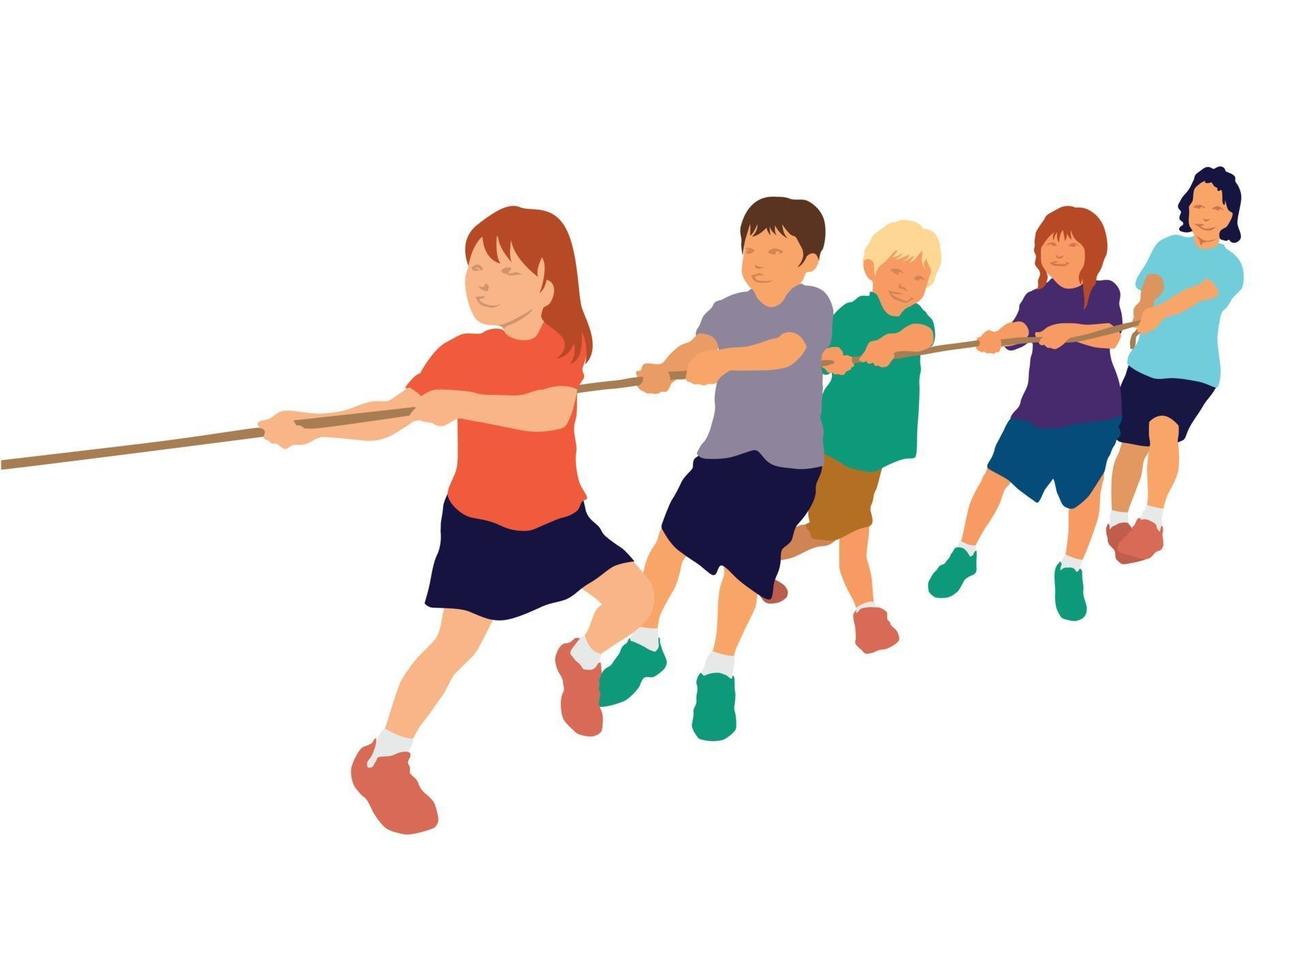 Tug of war children playing on illustration graphic vector